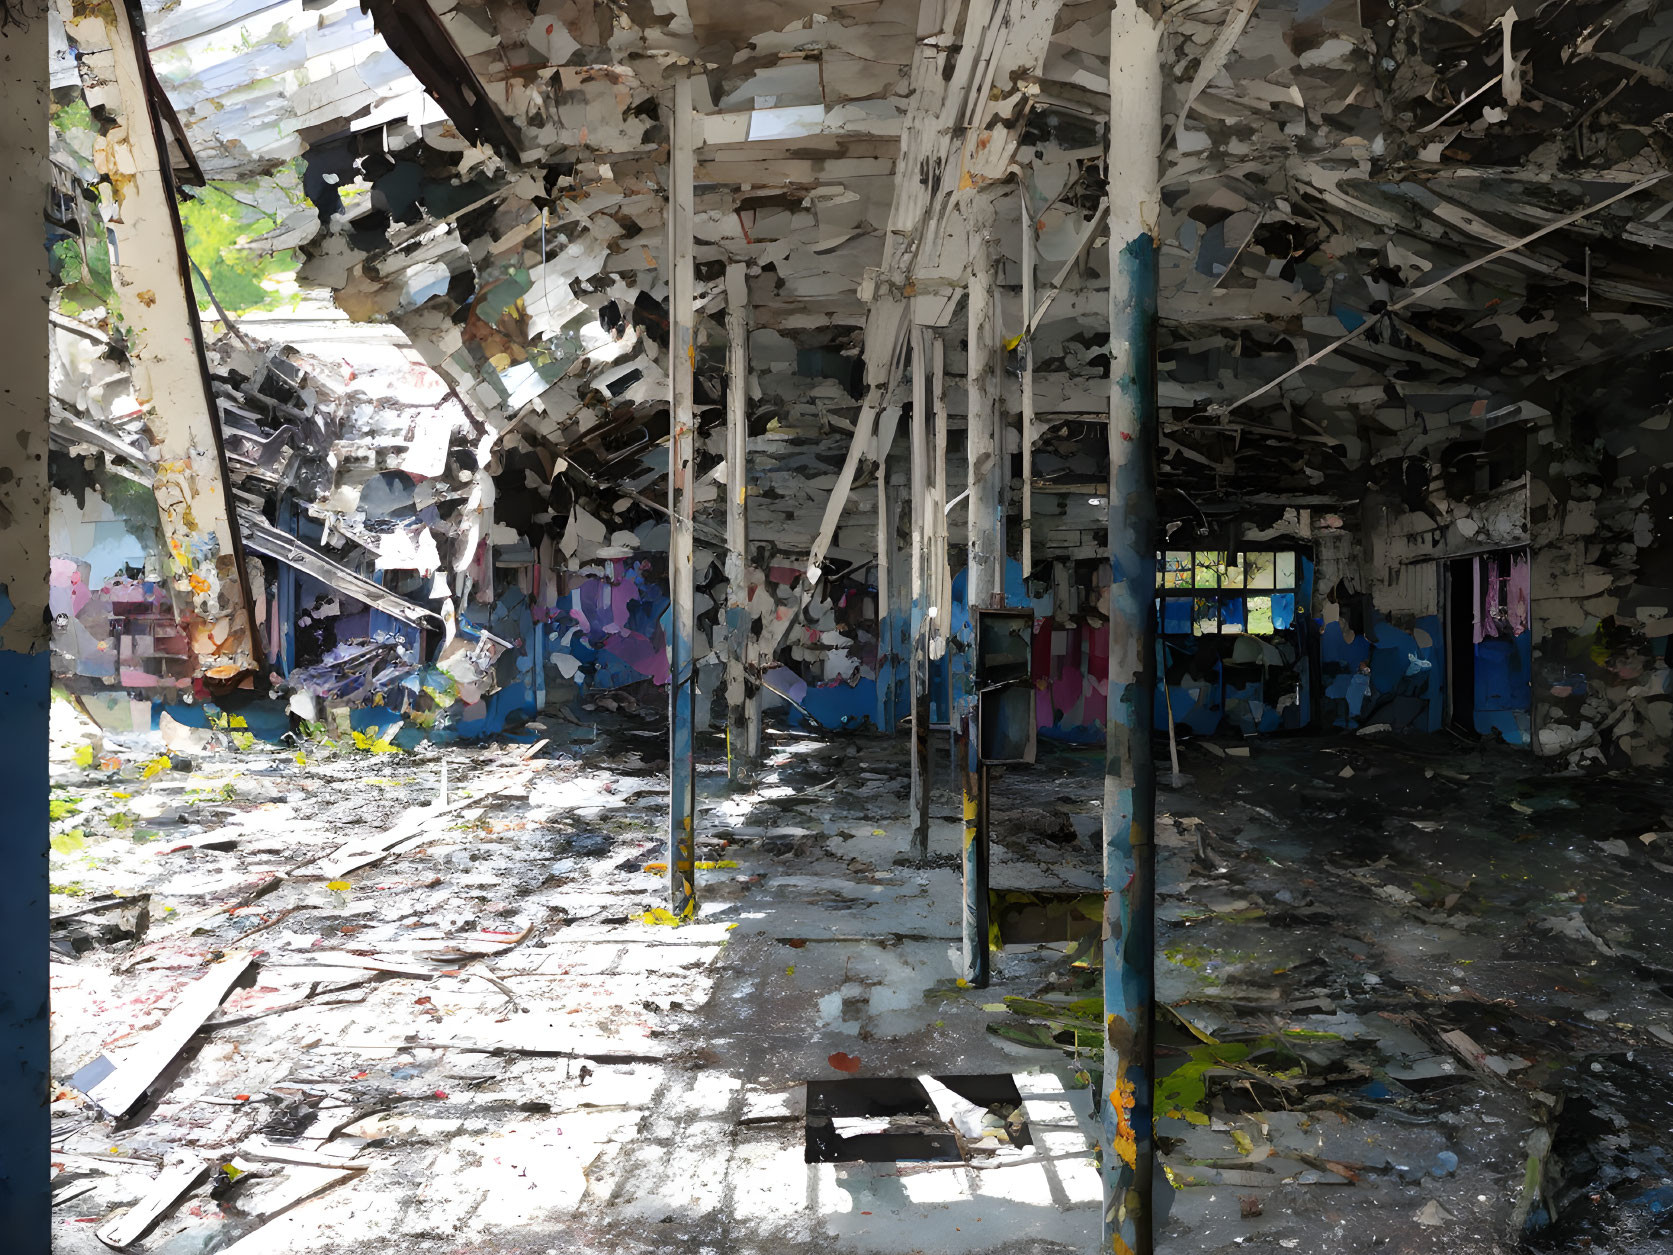 Abandoned building interior with peeling ceilings, graffiti, debris, and columns